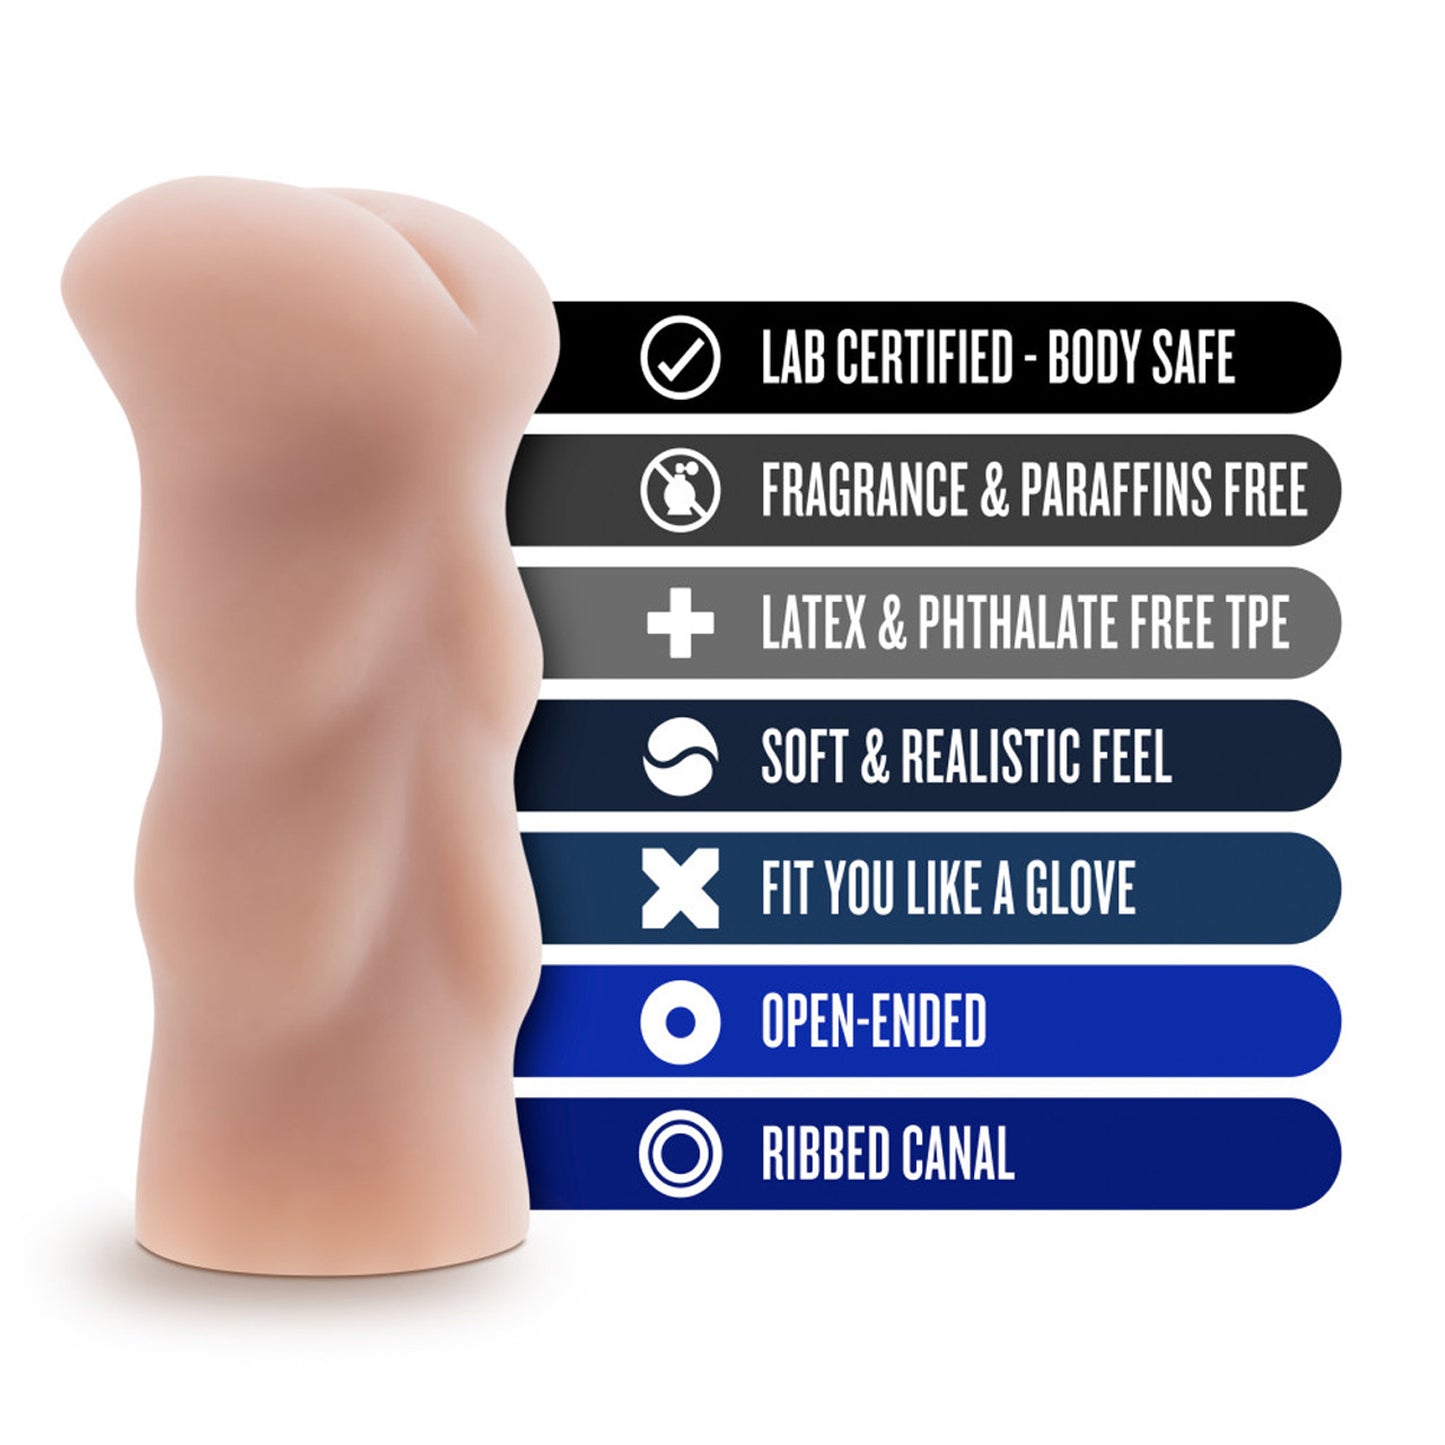 blush X5 Men The Back Door Stroker features: LAB CERTIFIED - BODY SAFE; FRAGRANCE & PARAFFINS FREE; LATEX & PHTHALATE FREE TPE; SOFT & REALISTIC FEEL; FIT YOU LIKE A GLOVE; OPEN-ENDED; RIBBED CANAL.